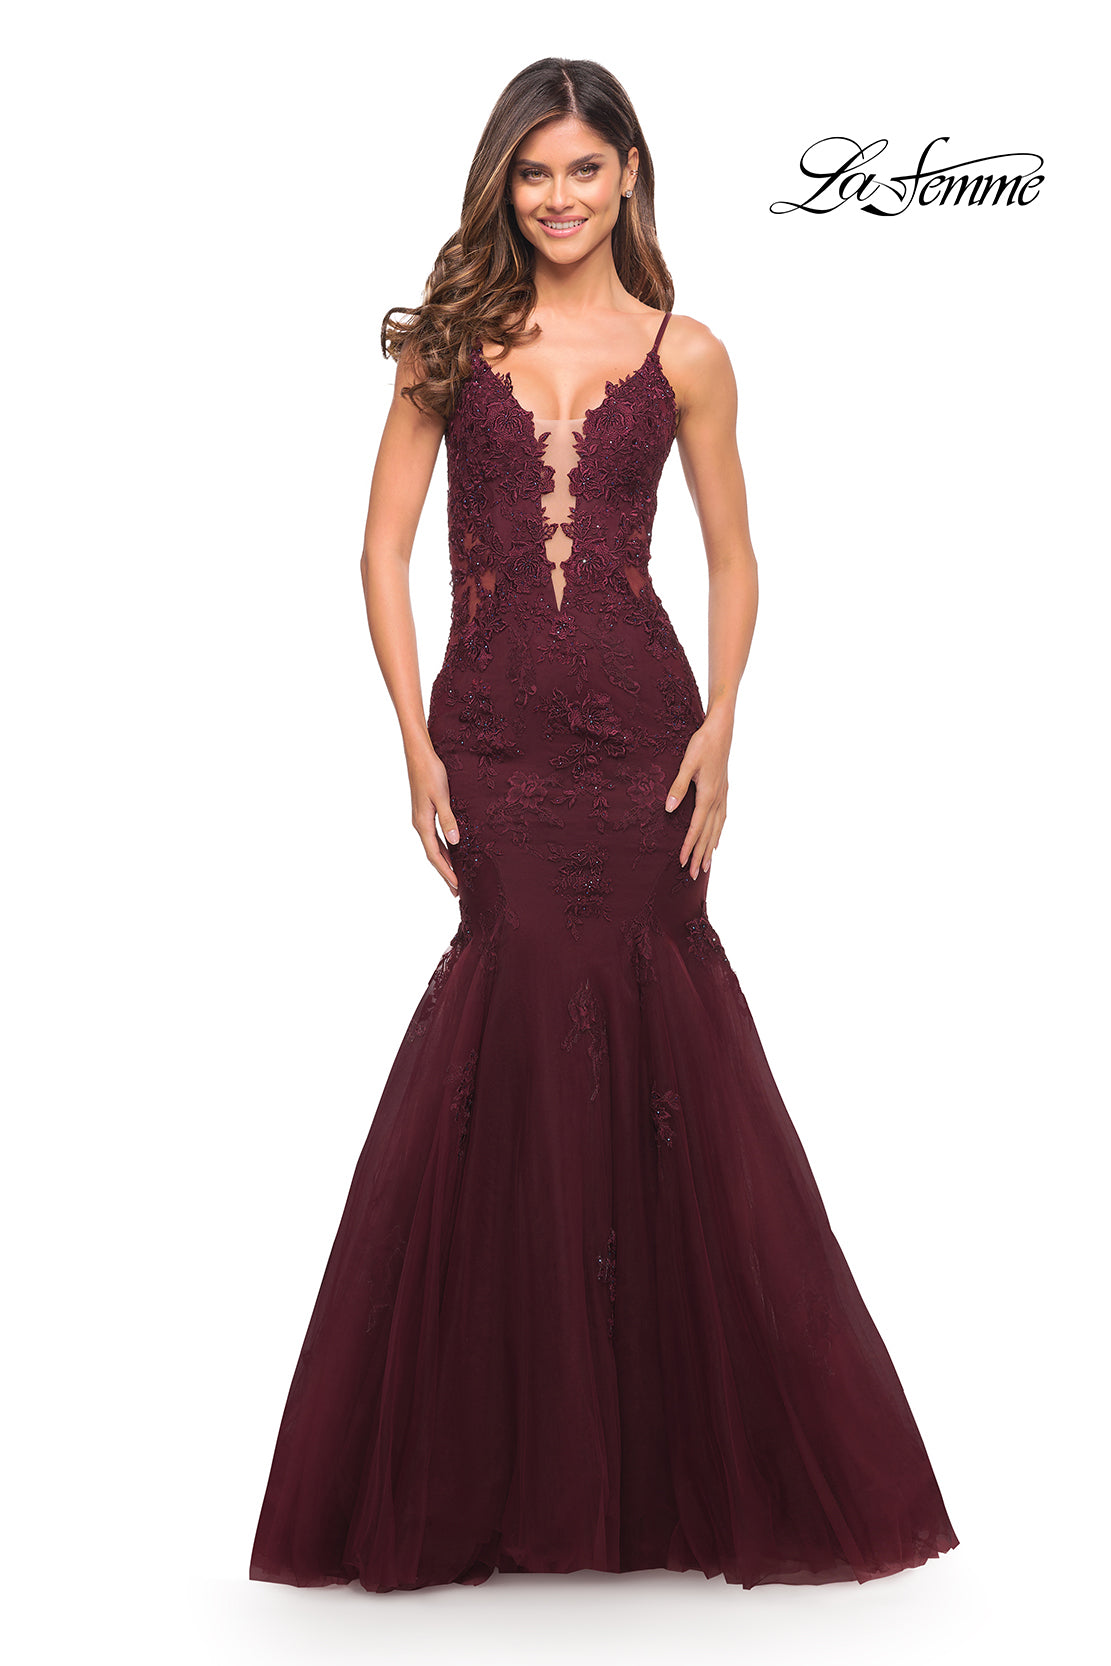 La Femme Embroidered-Lace Long Mermaid Prom Dress